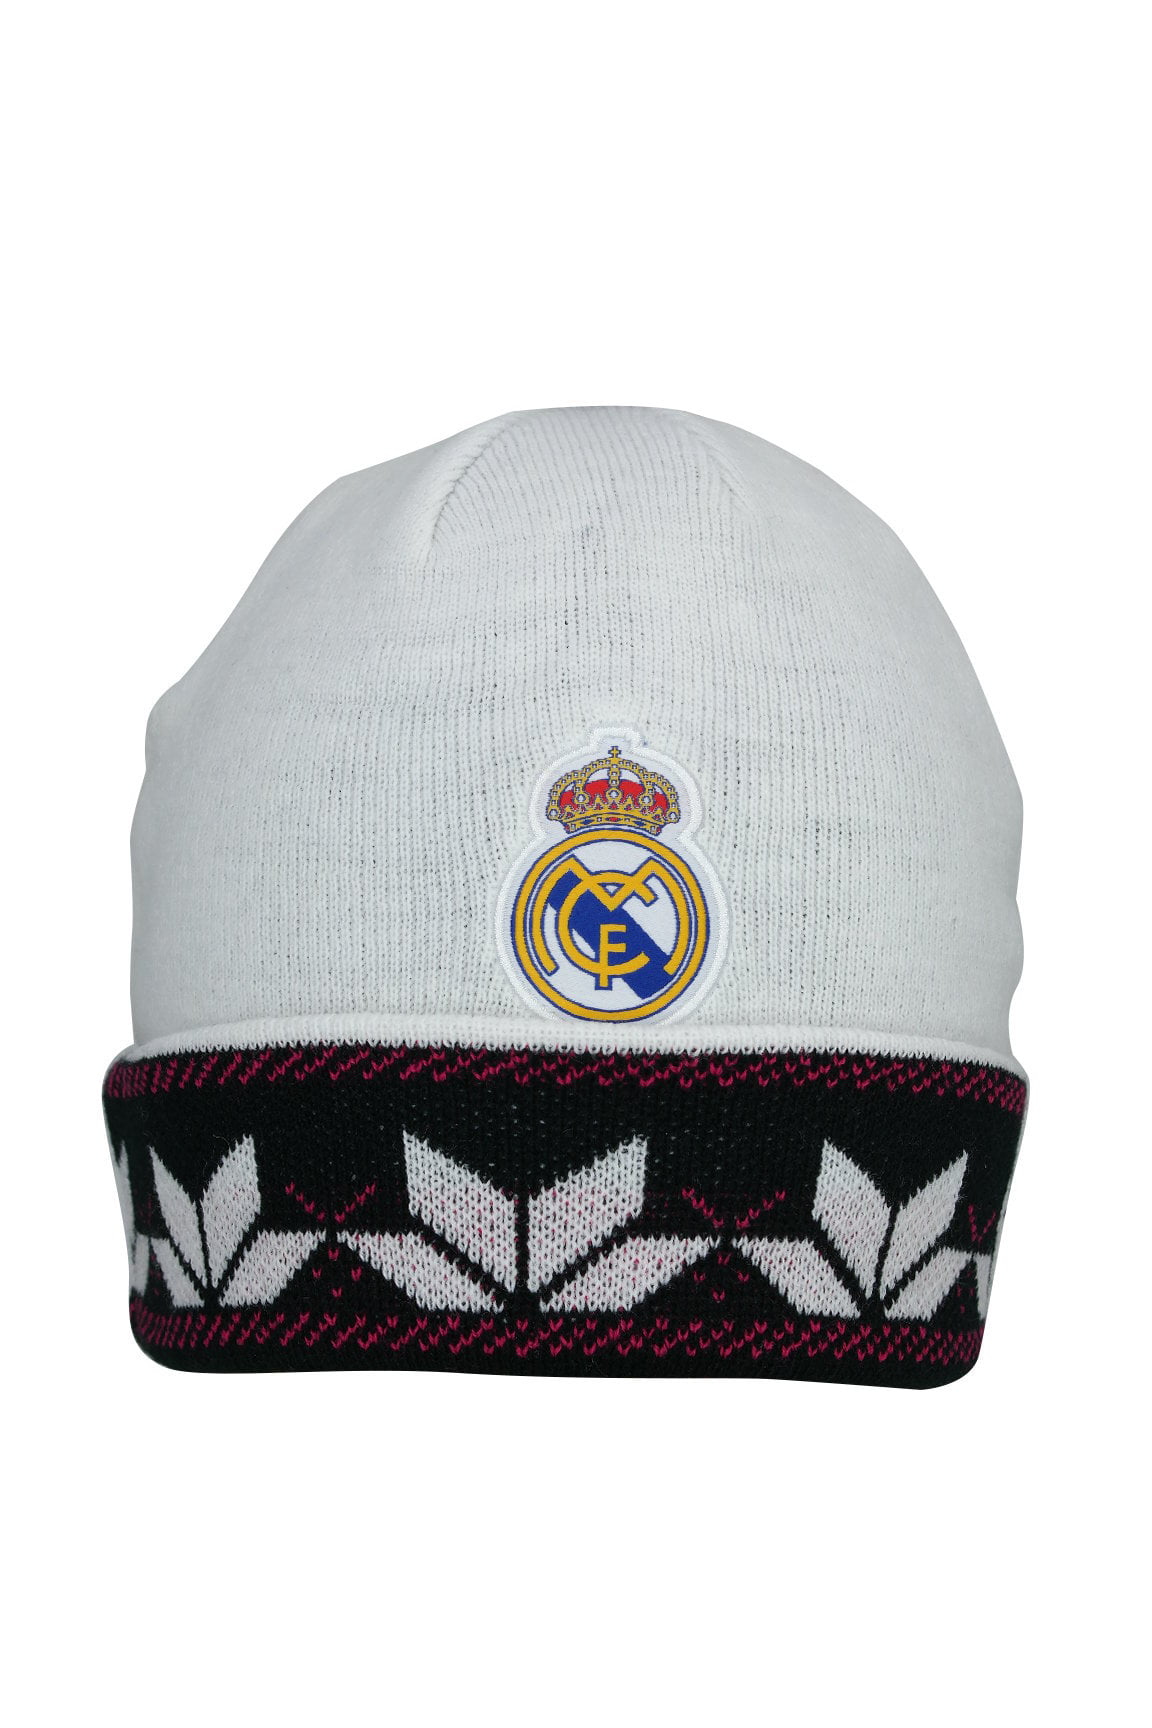 005 Authentic Official Licensed Product Soccer Beanie Real Madrid C.F 